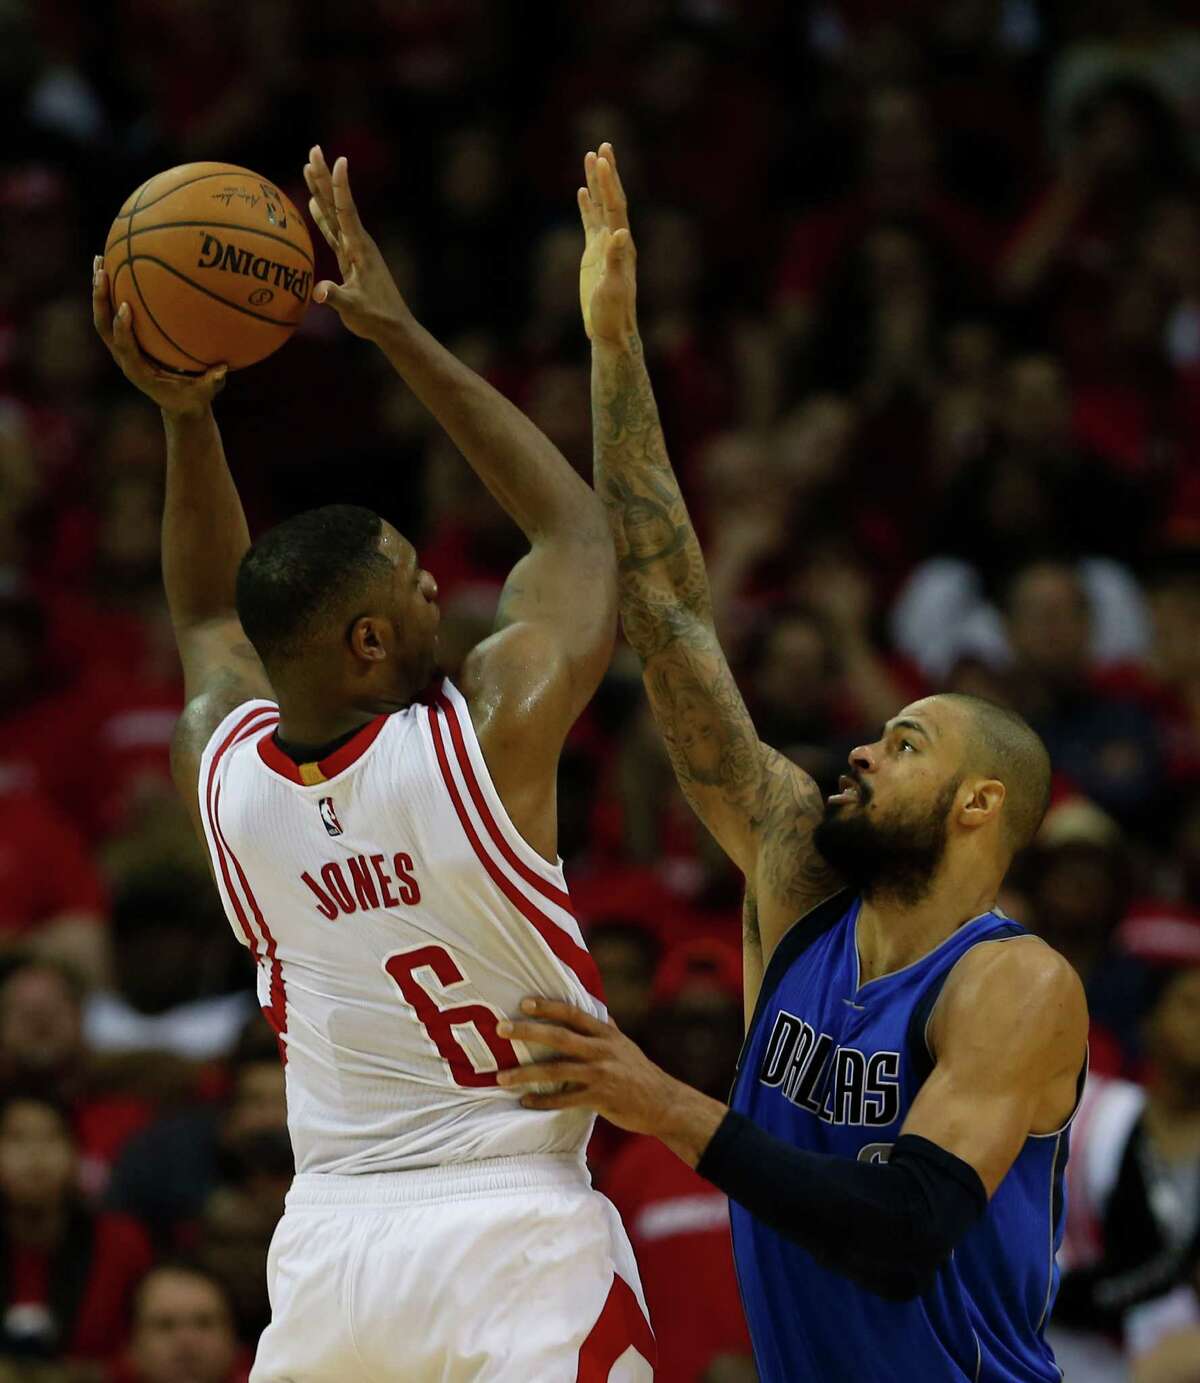 Houston Rockets forward Terrence Jones shoots over Dallas Mavericks center Tyson Chandler during the second half of the Western Conference Playoff game at the Toyota Center Saturday, April 18, 2015, in Houston. ( James Nielsen / Houston Chronicle )